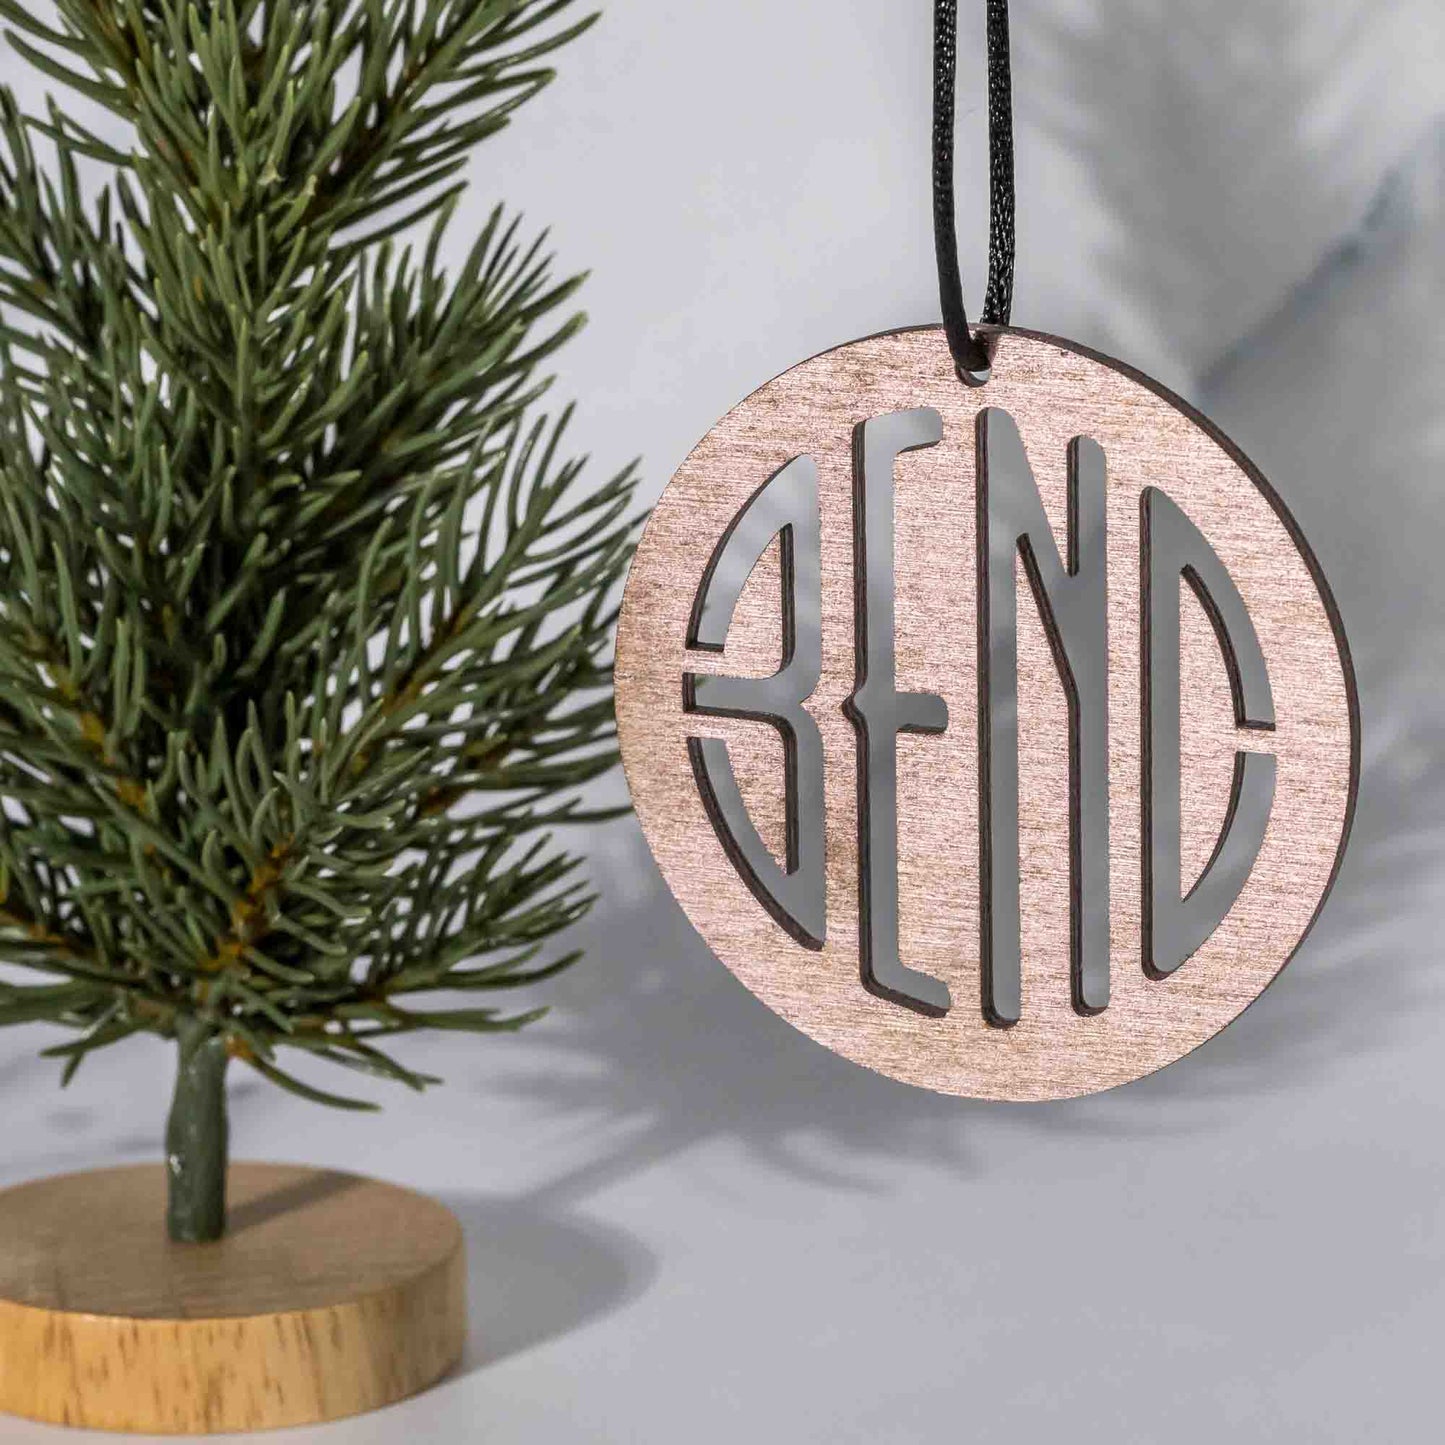 State Christmas Ornaments: Bend, Oregon (Cut Out) - LeeMo Designs